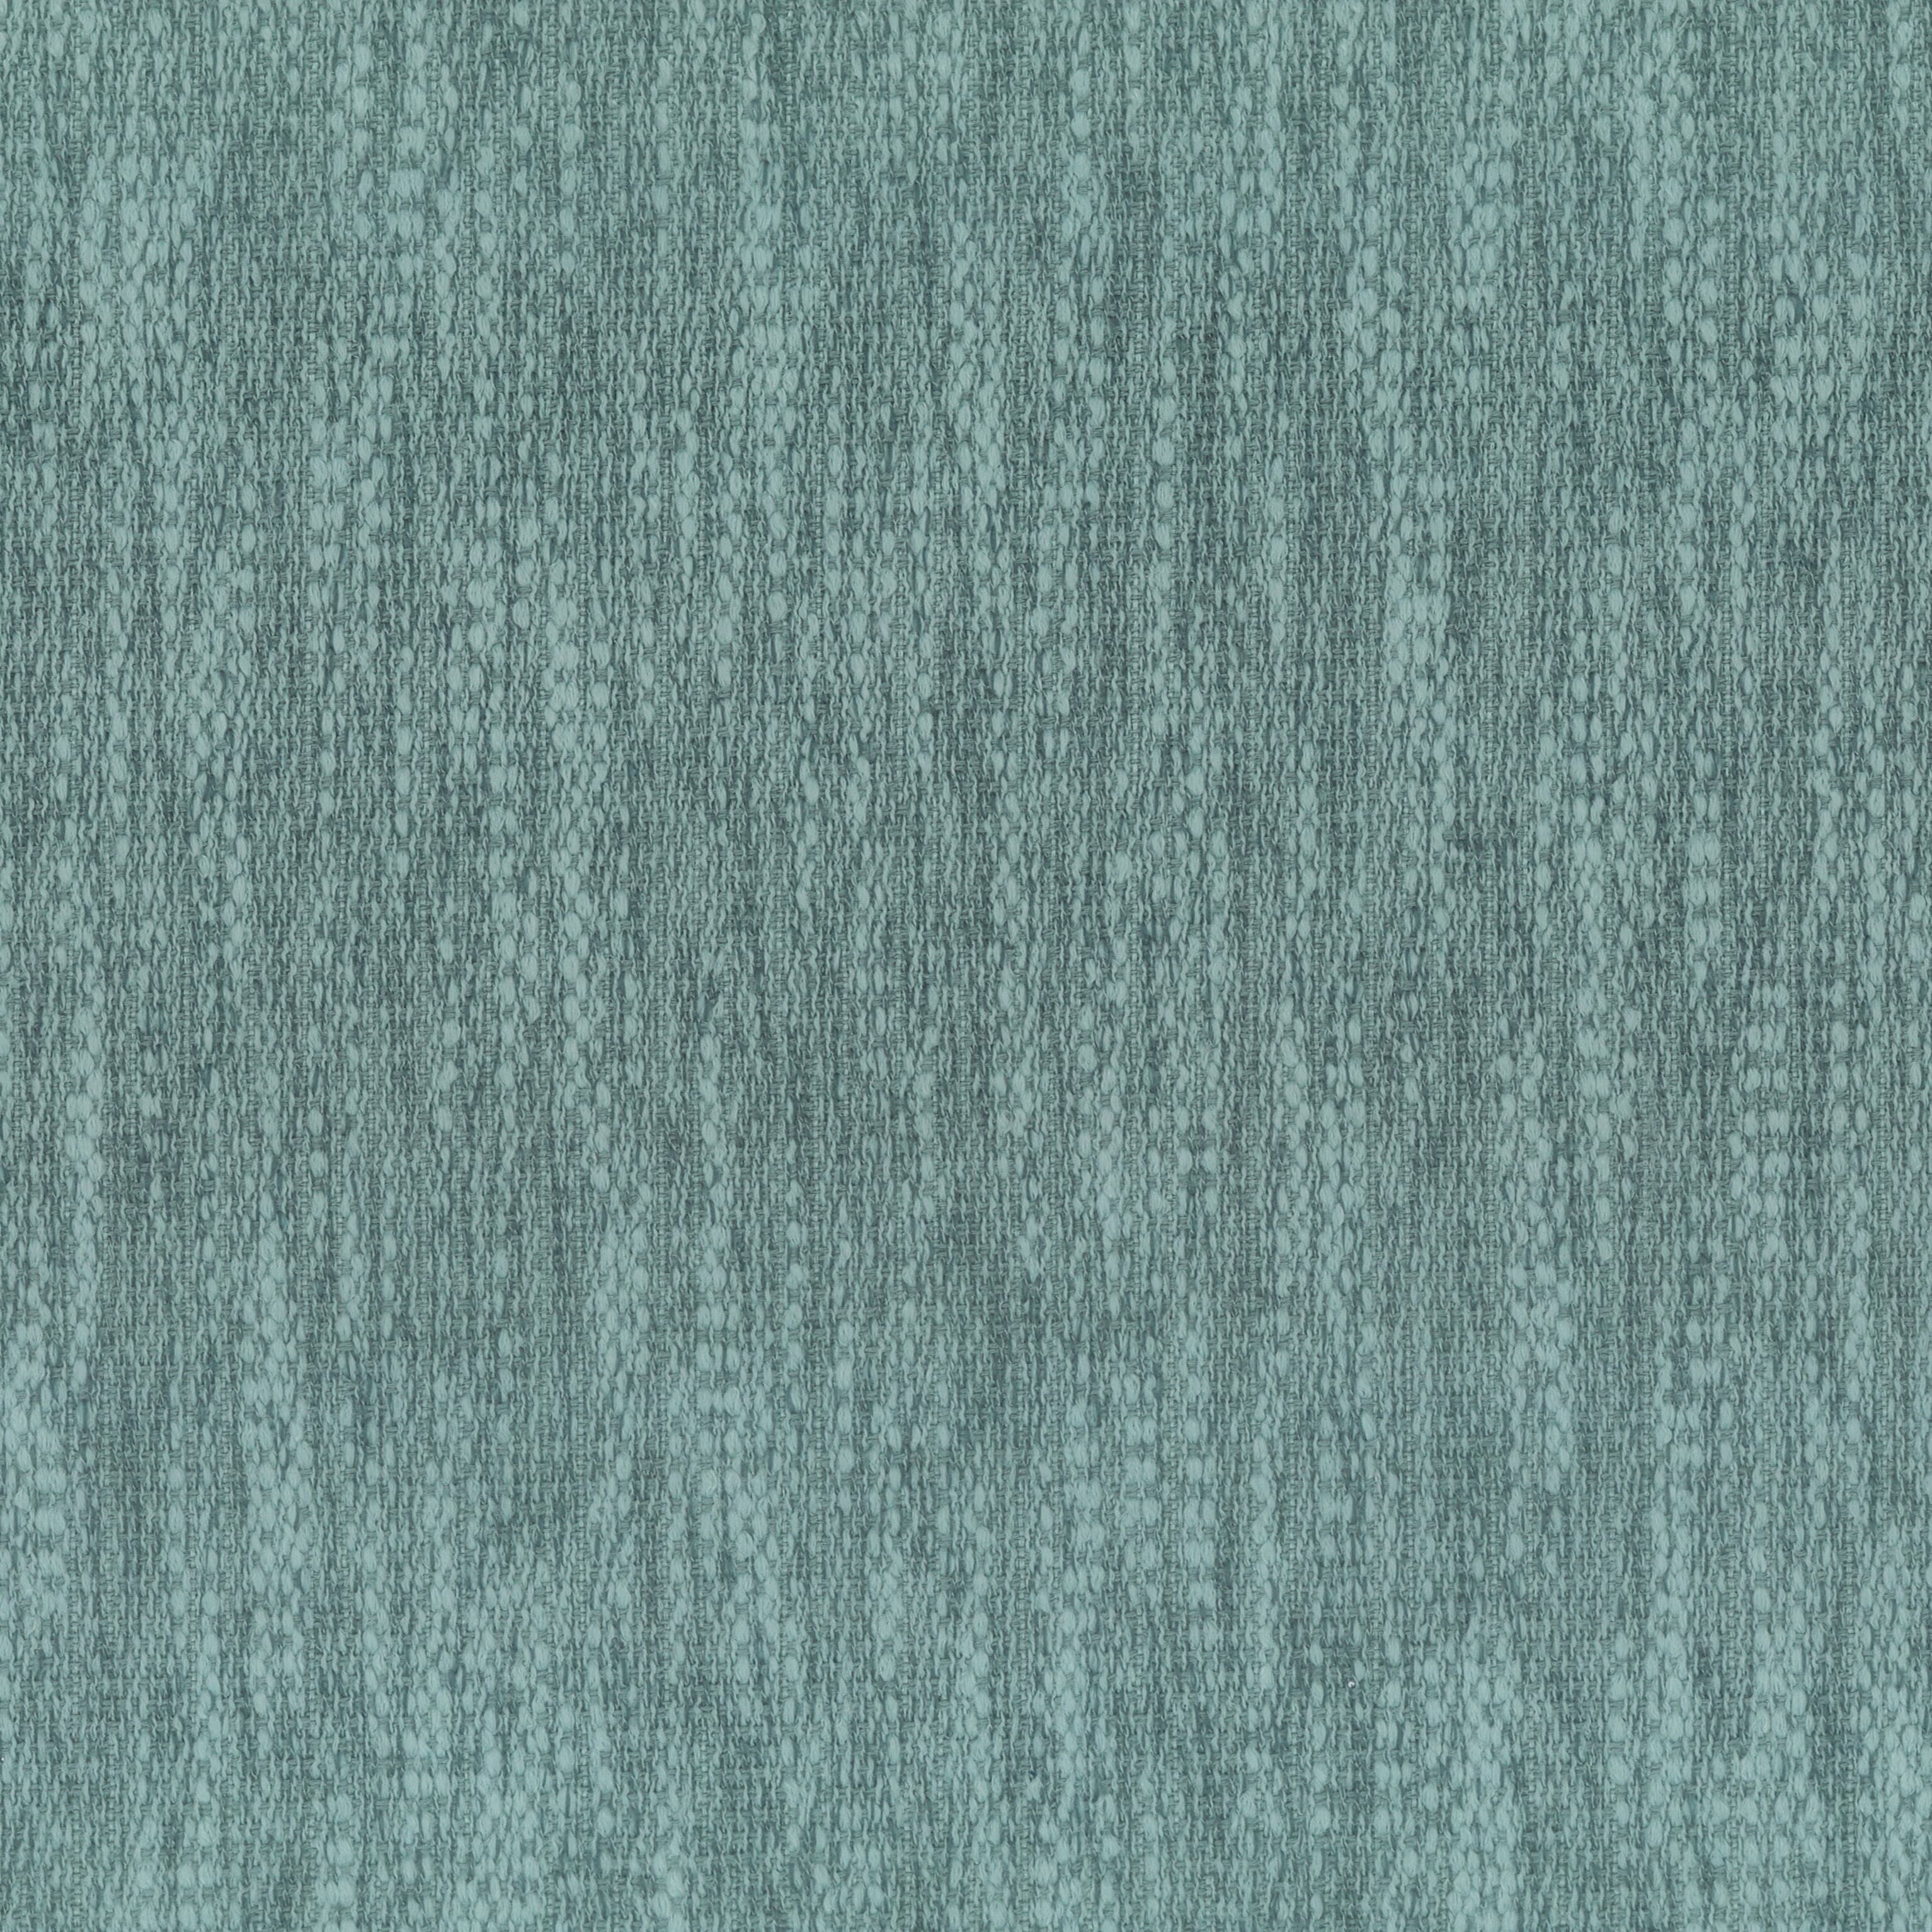 Knockout 2 Teal by Stout Fabric